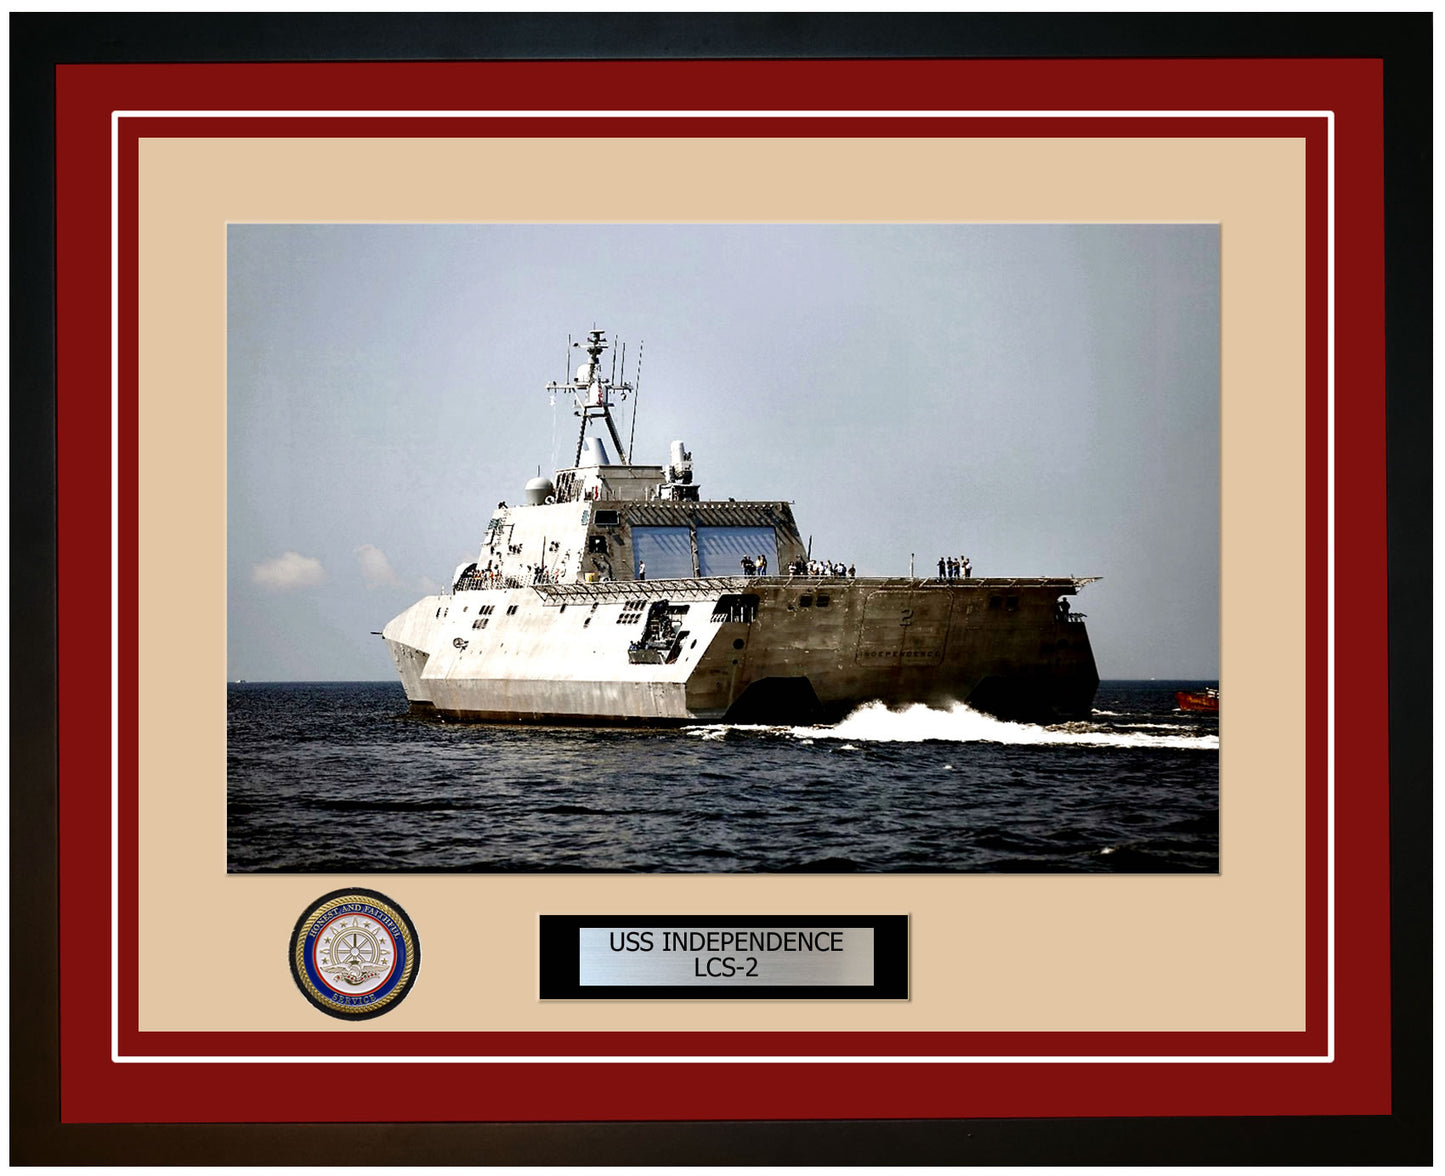 USS Independence LCS-2 Framed Navy Ship Photo Burgundy